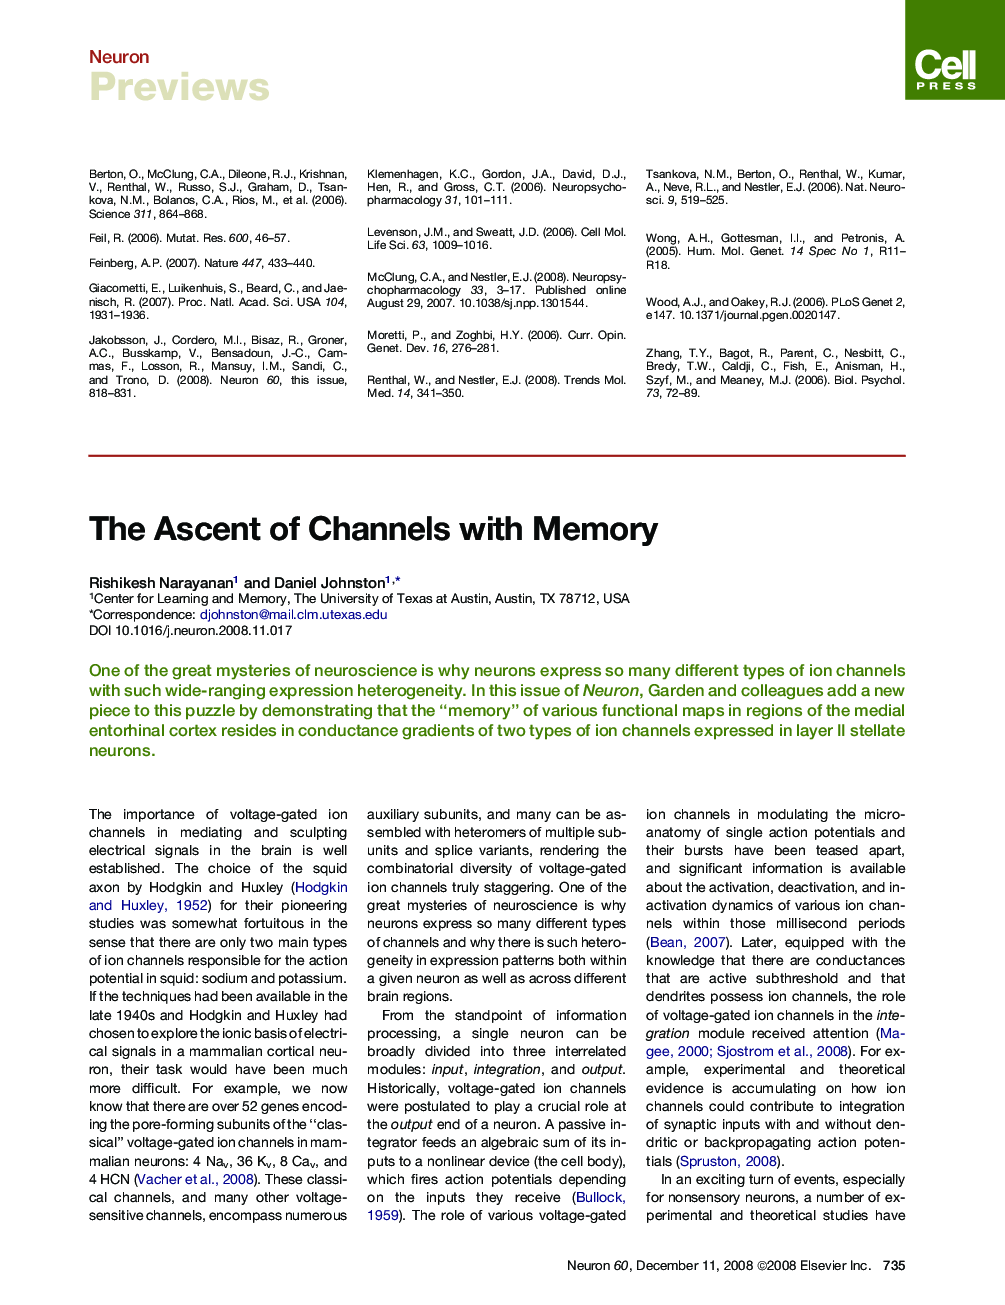 The Ascent of Channels with Memory